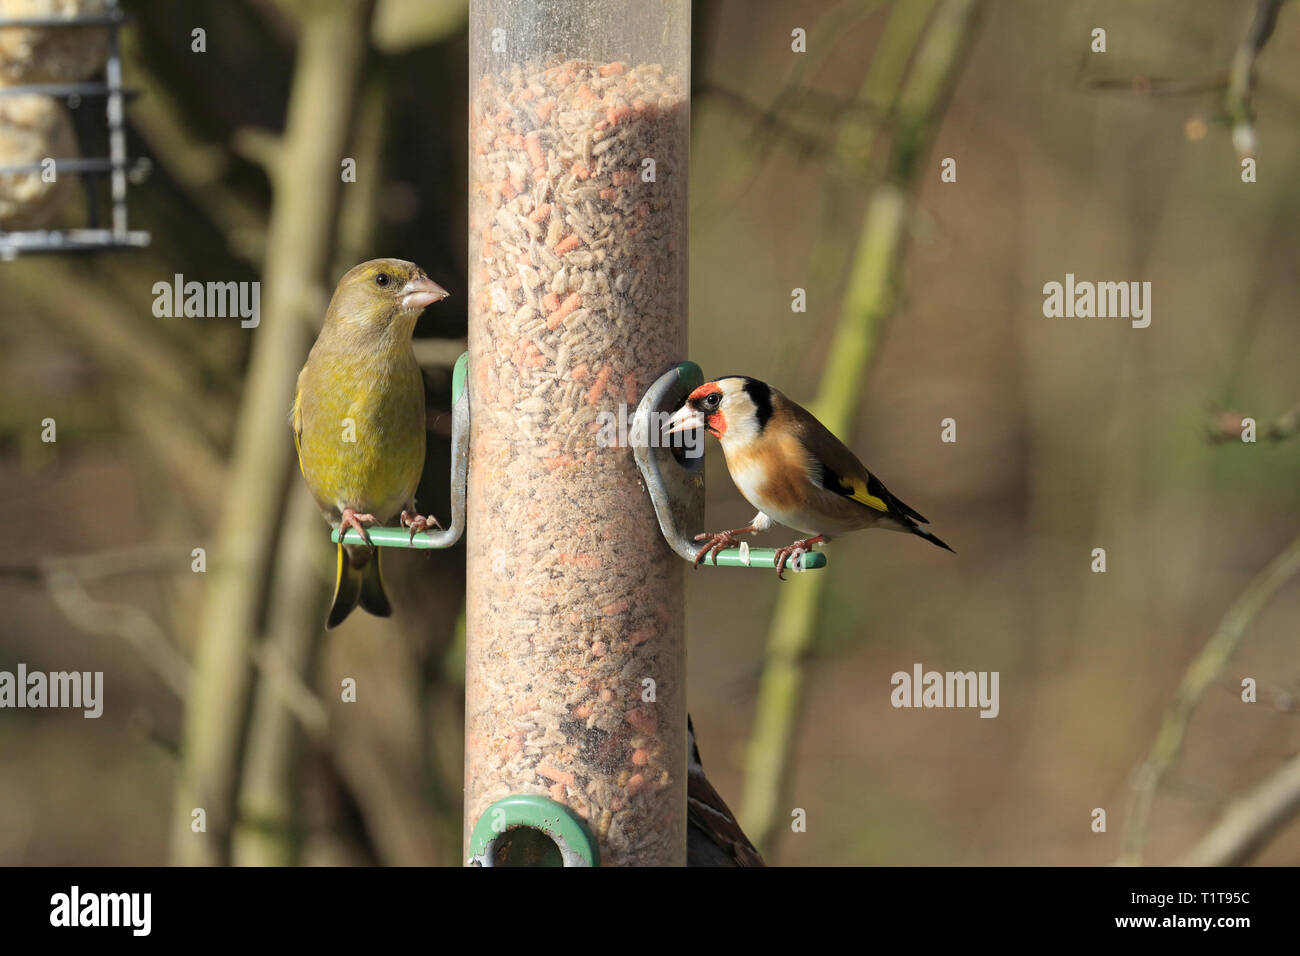 Male greenfinch, Carduelis chloris and male goldfinch, Carduelis carduelis on bird feeder, RSPB Fairburn Ings, Castleford, West Yorkshire, England, UK Stock Photo